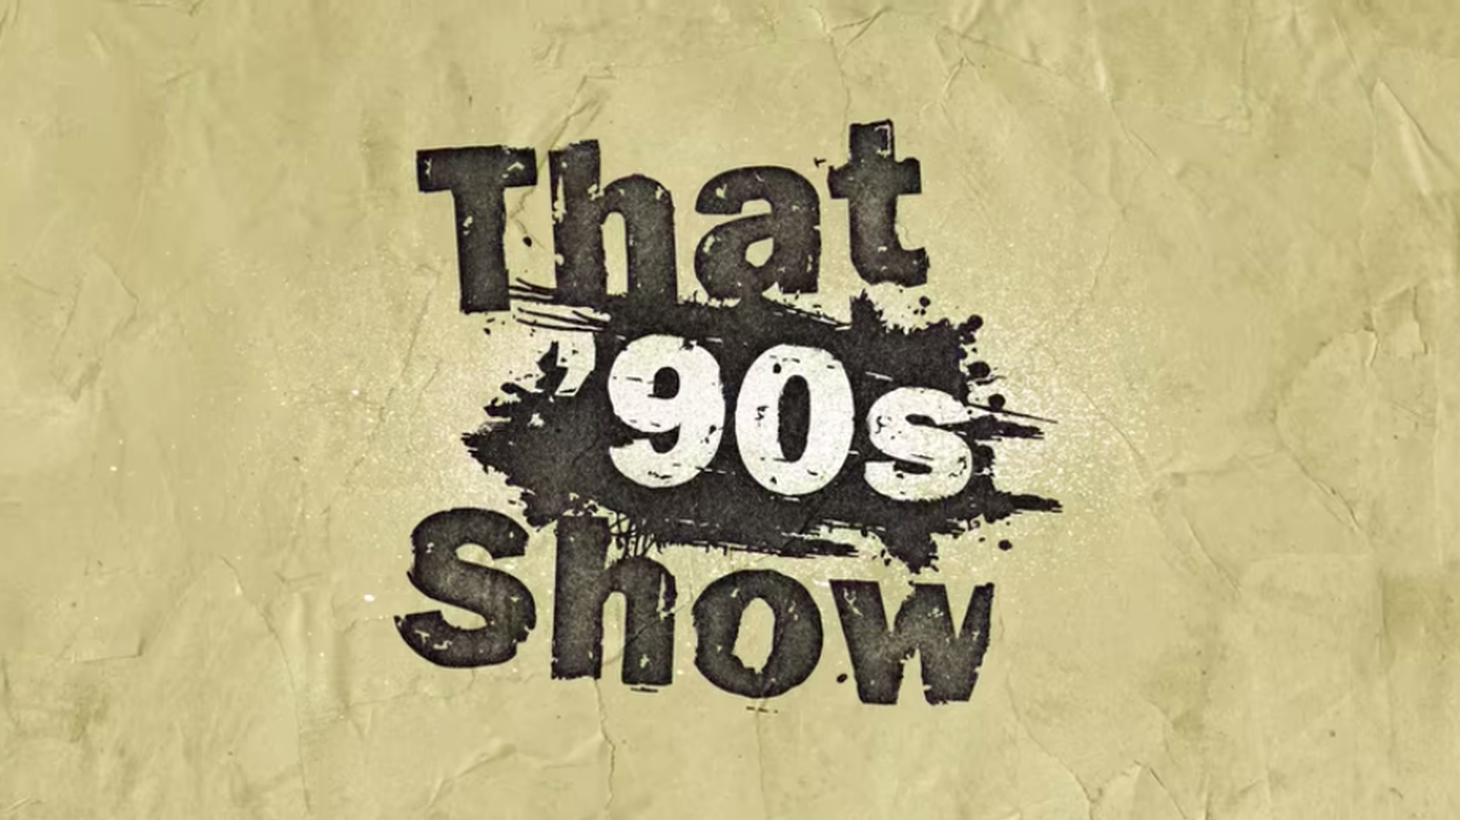 “That '90s Show” debuted on Netflix on January 19.